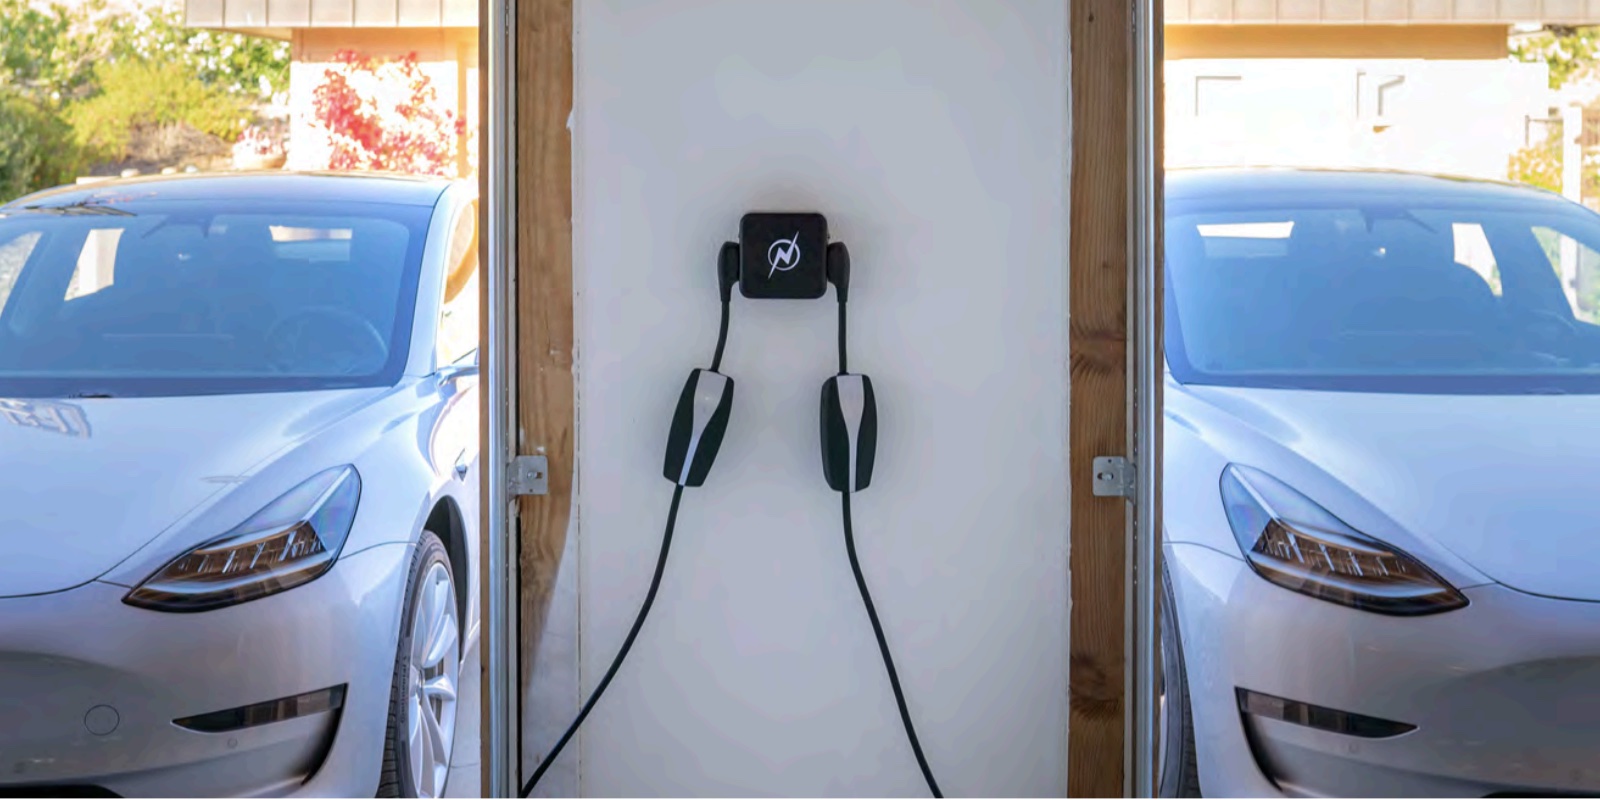 Neocharge 240v Smart Splitter Allows Extra Ev Charging Without Expensive Wiring Electrek